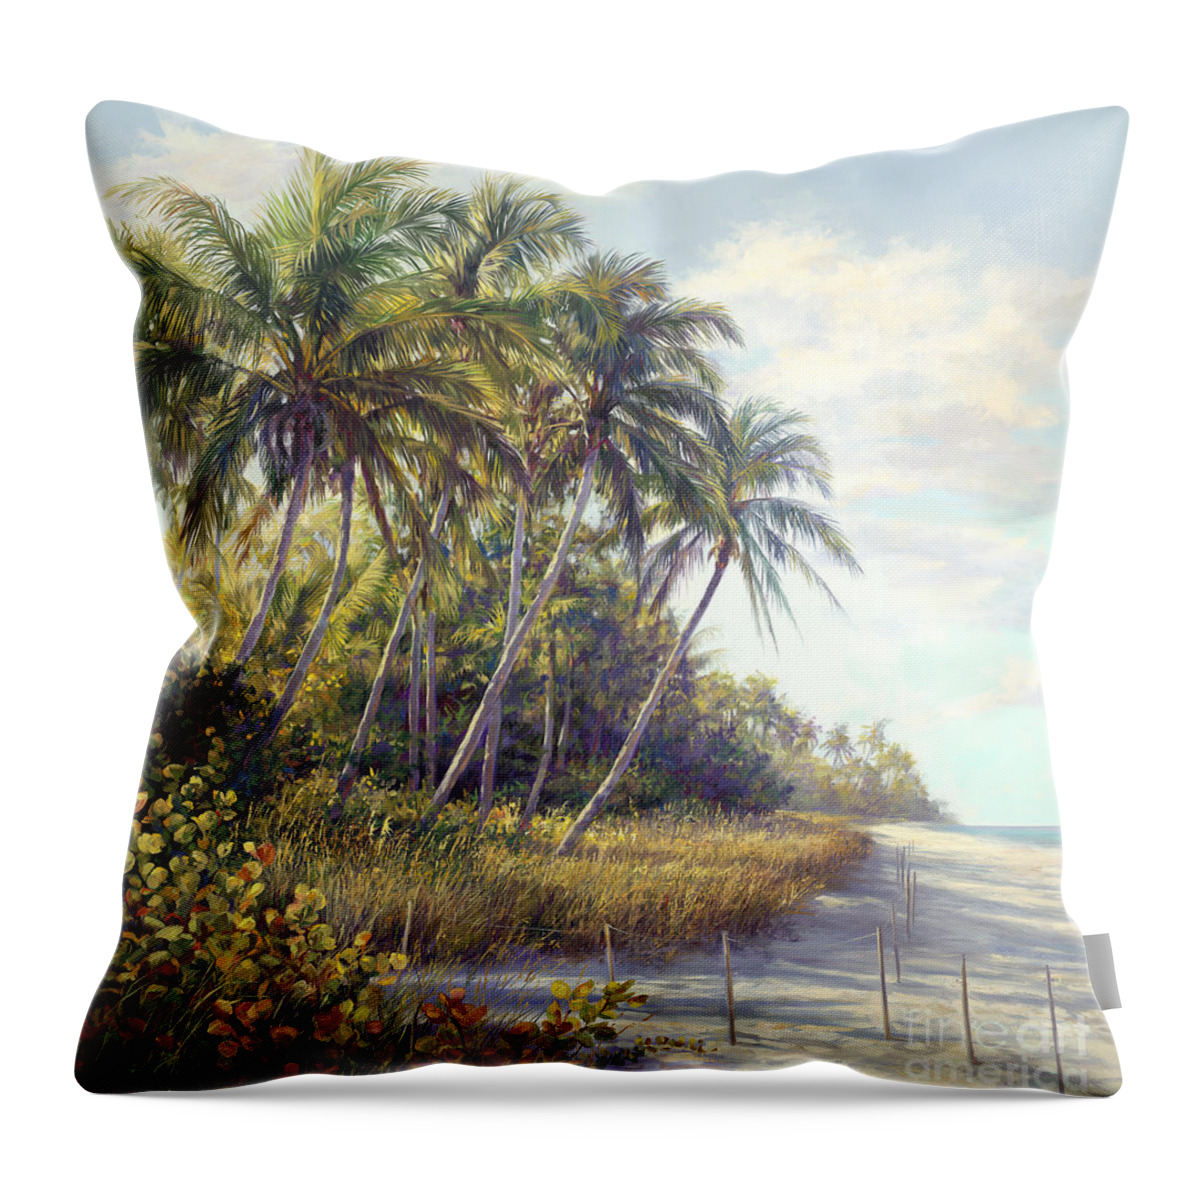 Beach Landscapes Throw Pillow featuring the painting Naples Beach Access by Laurie Snow Hein